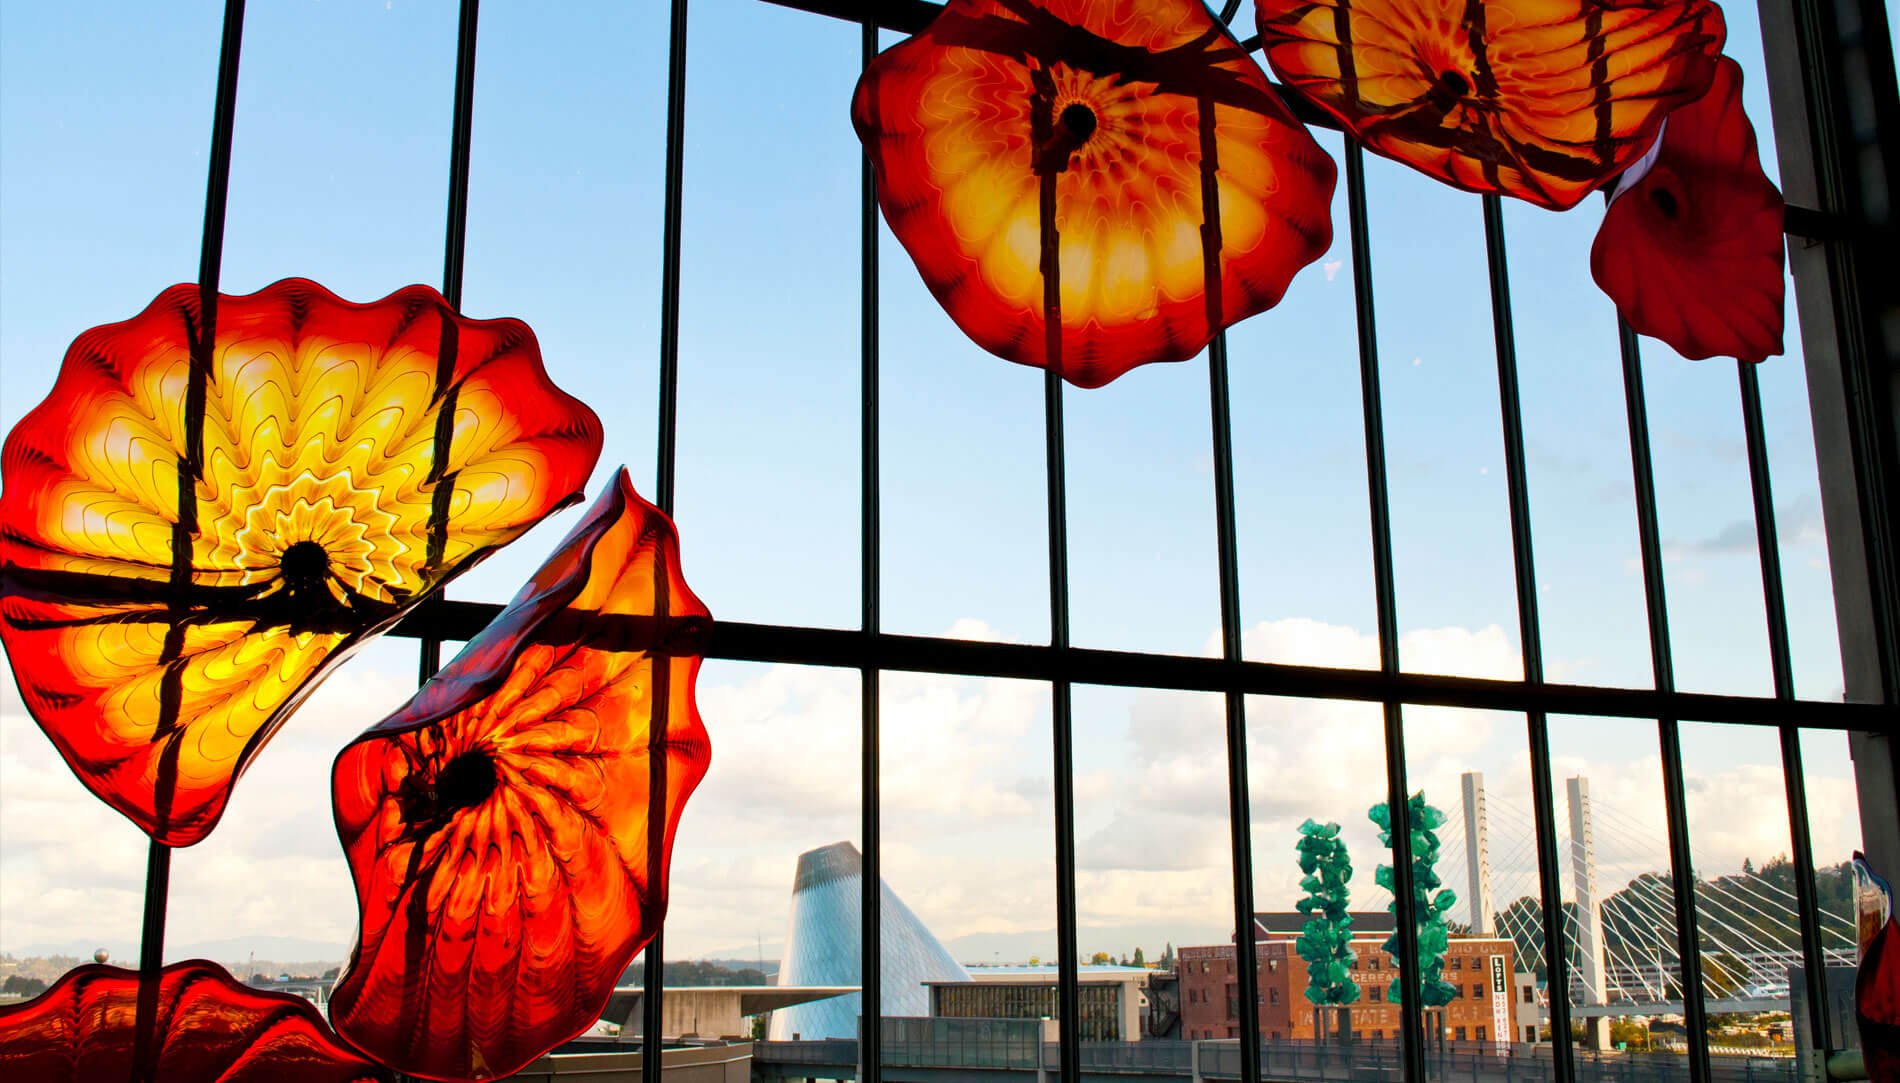 Glass art installation Union Station MoG and Chihuly Bridge of Glass in the background Credit Travel Tacoma